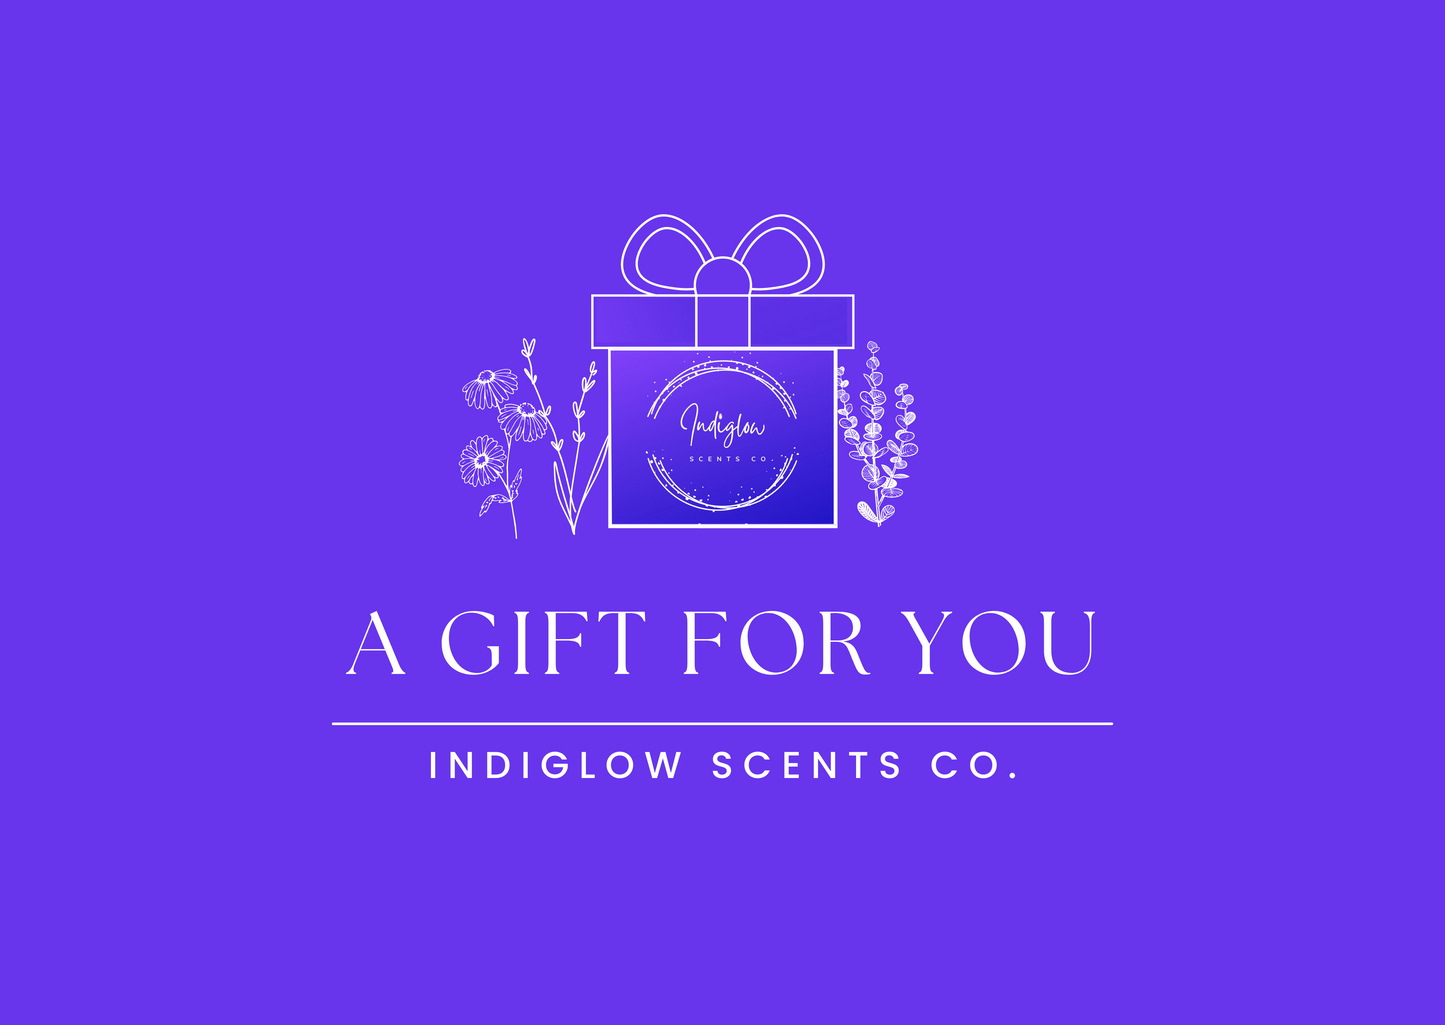 Indiglow Scents Co. Digital Gift Card